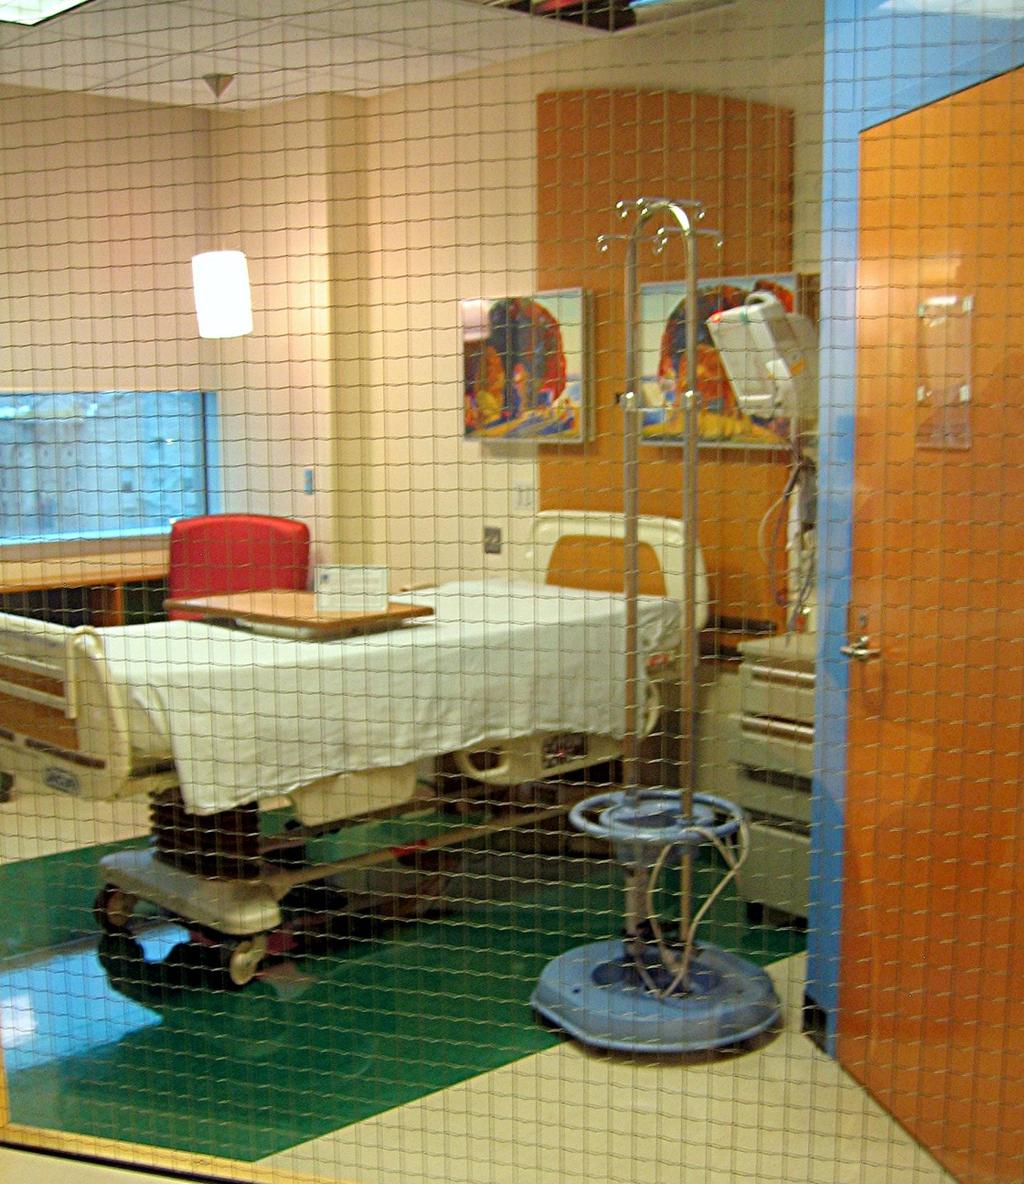 Providing single rooms is vital for adapting to sicker patients in future Best is a